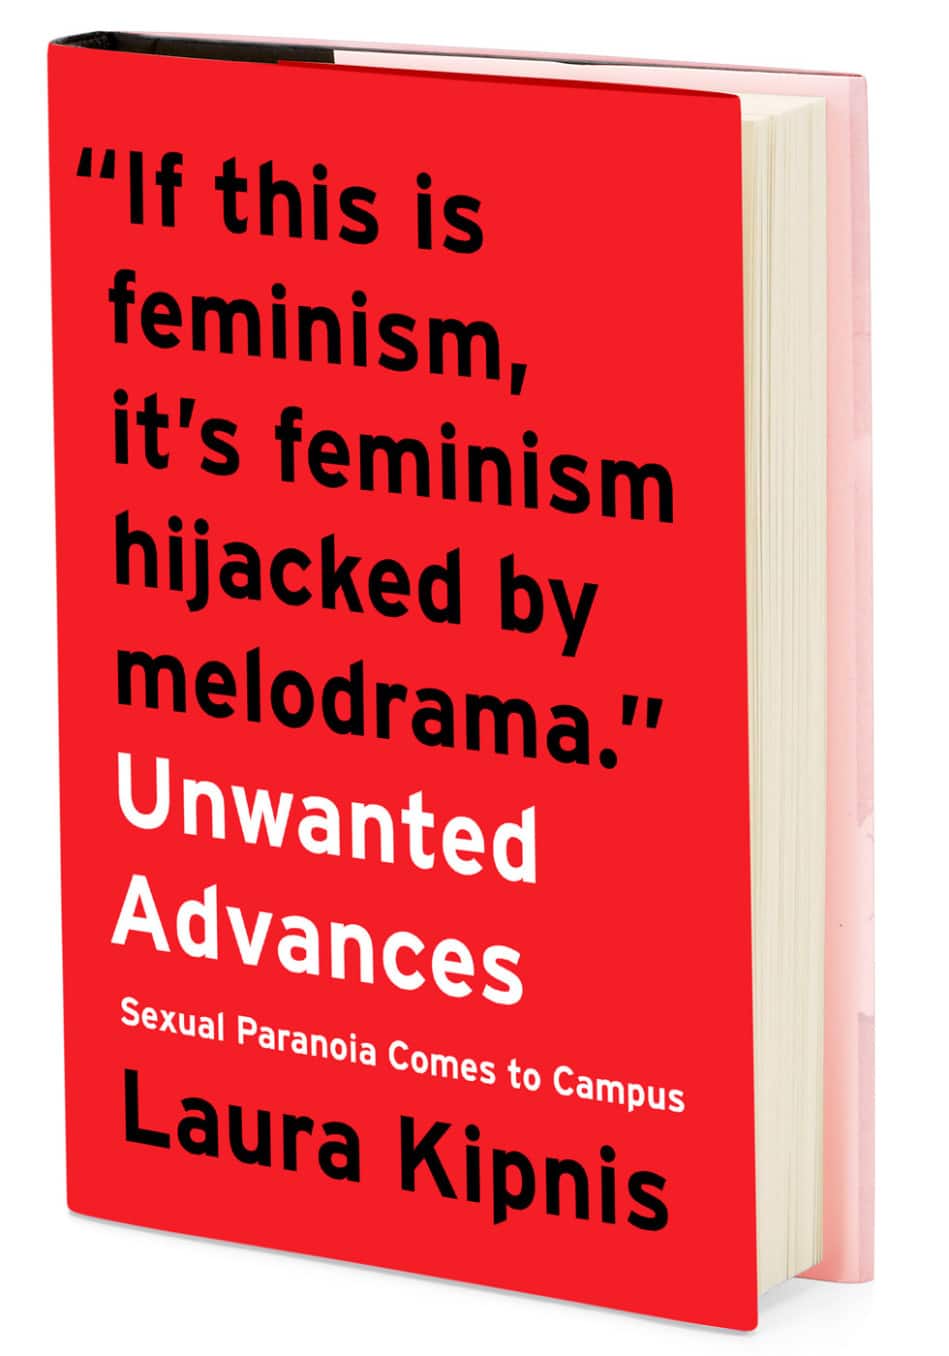 A Picture of a red book that says "if this is feminism, it's feminism hijacked by melodrama. Unwanted Advances: Sexual Paranoia Comes To Campus" by Laura Kipnis